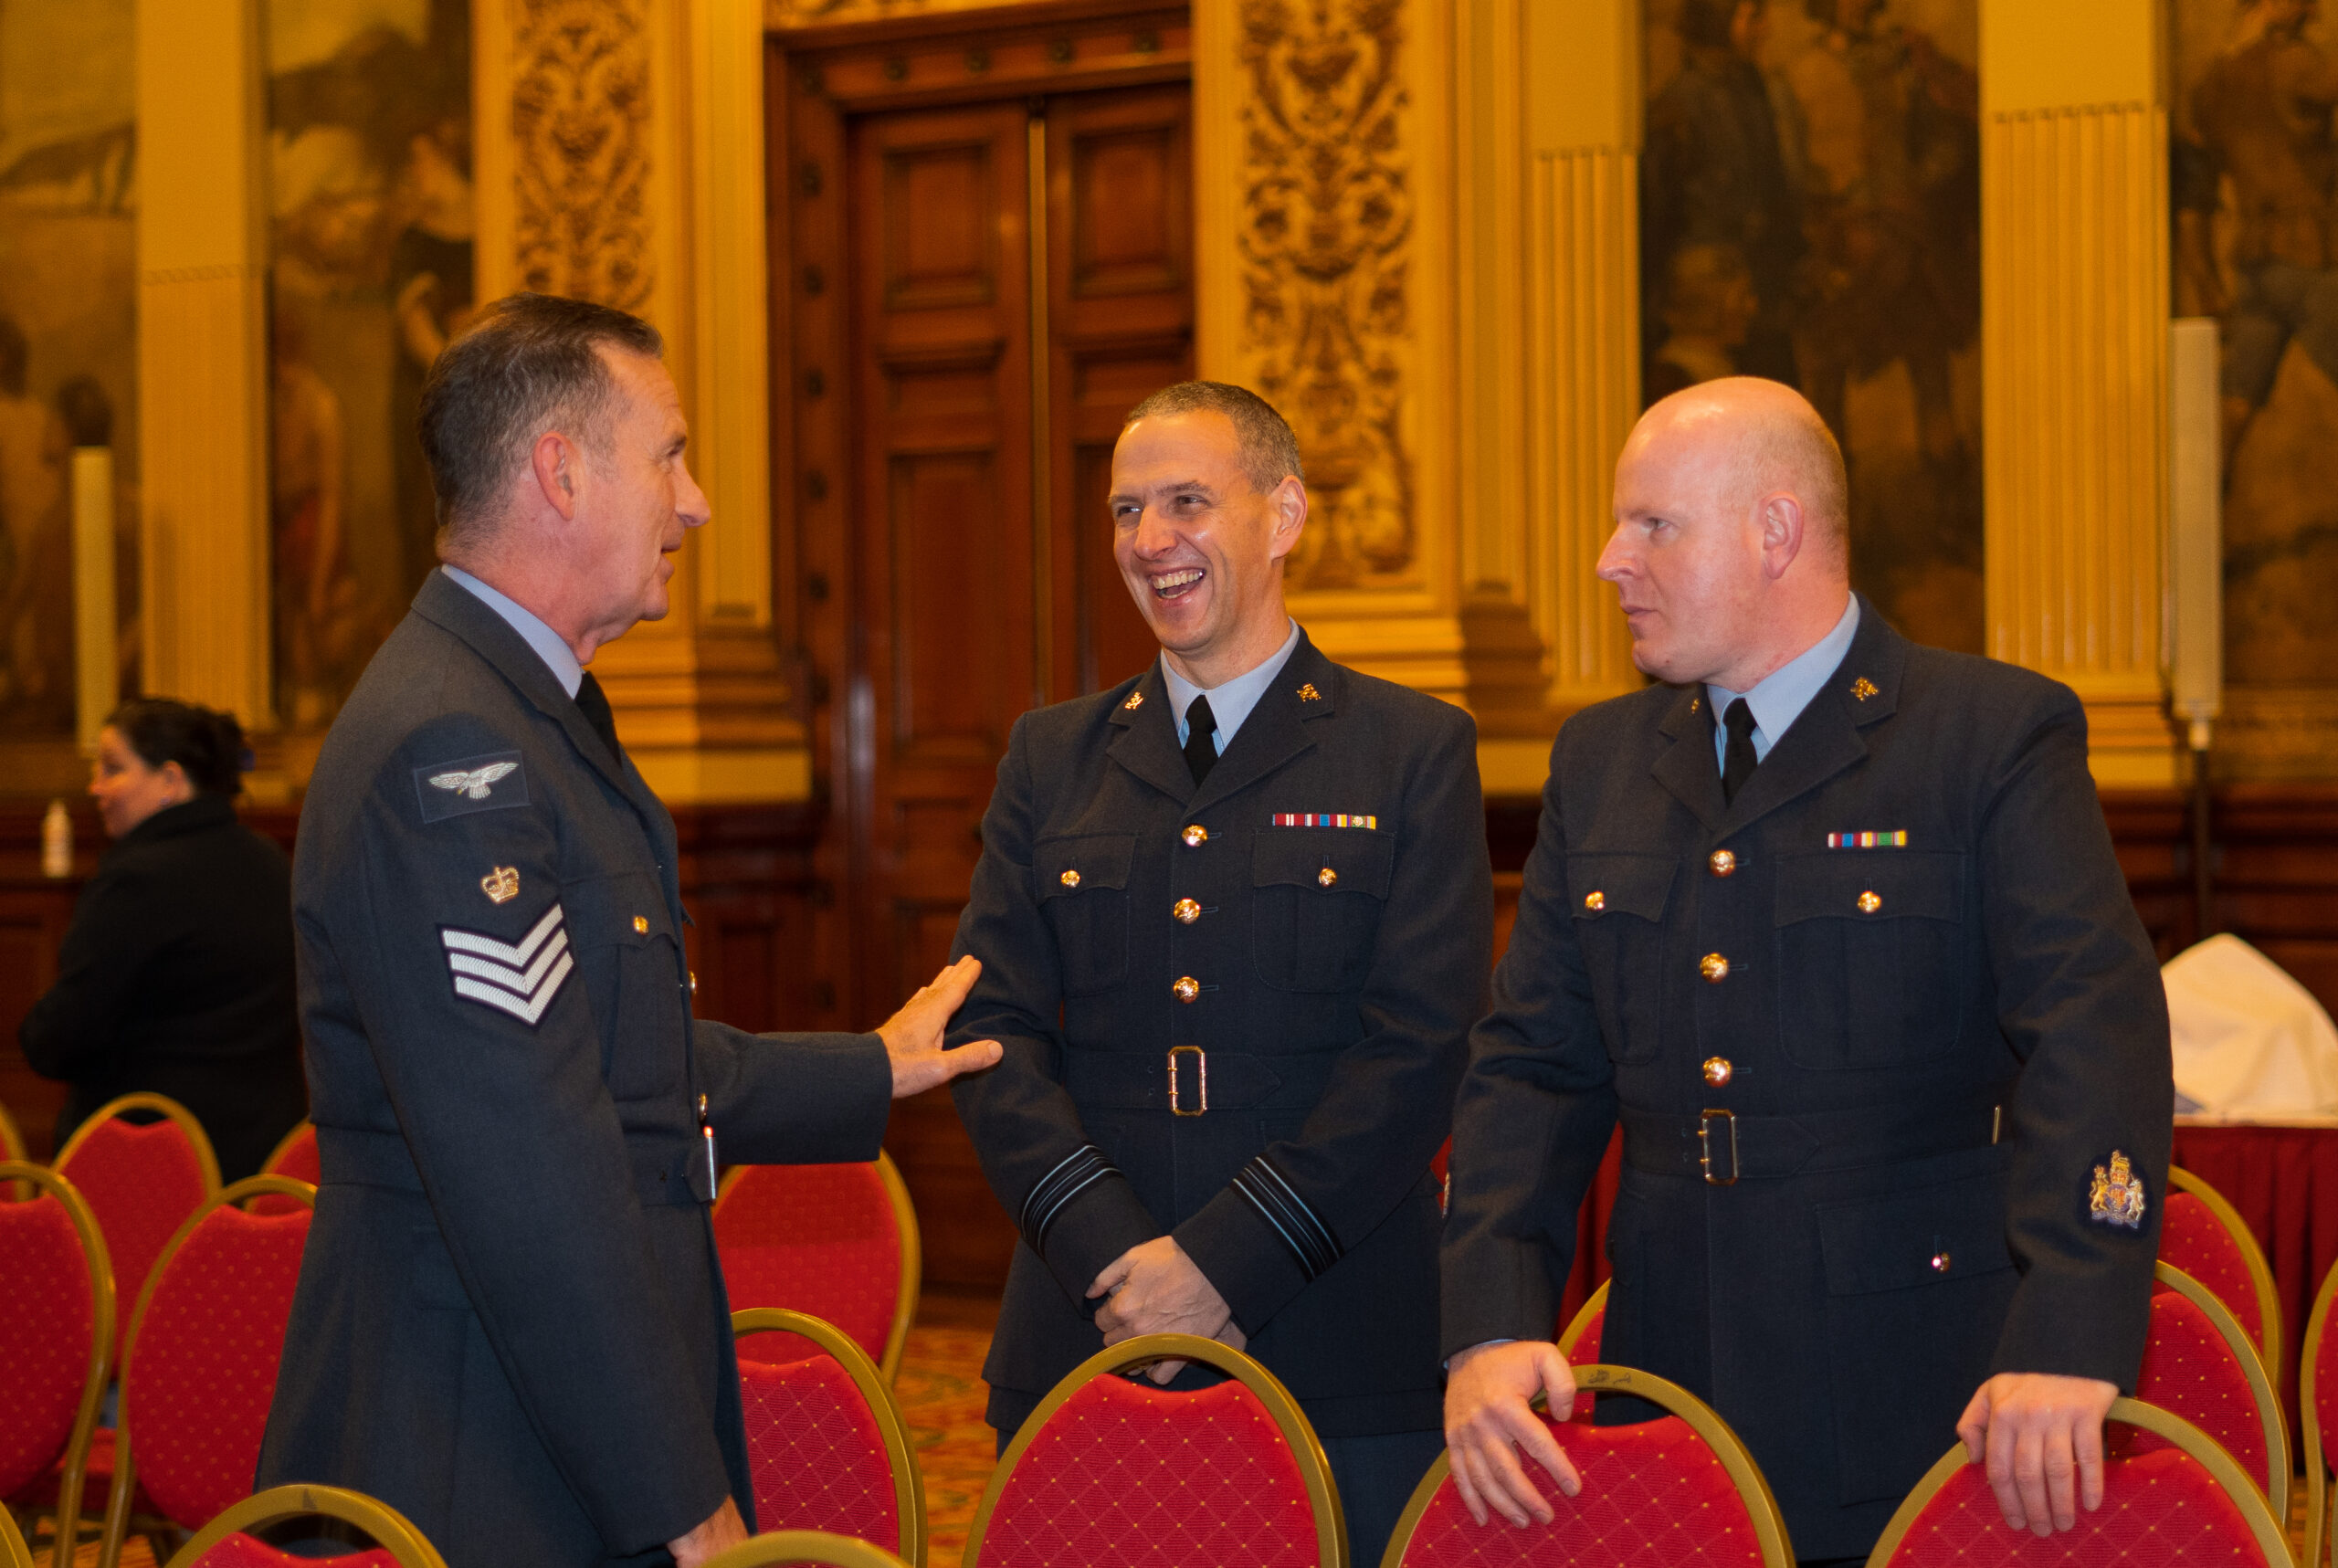 CFAVs from West Scotland Wing Air Training Corps catching up before the awards event.